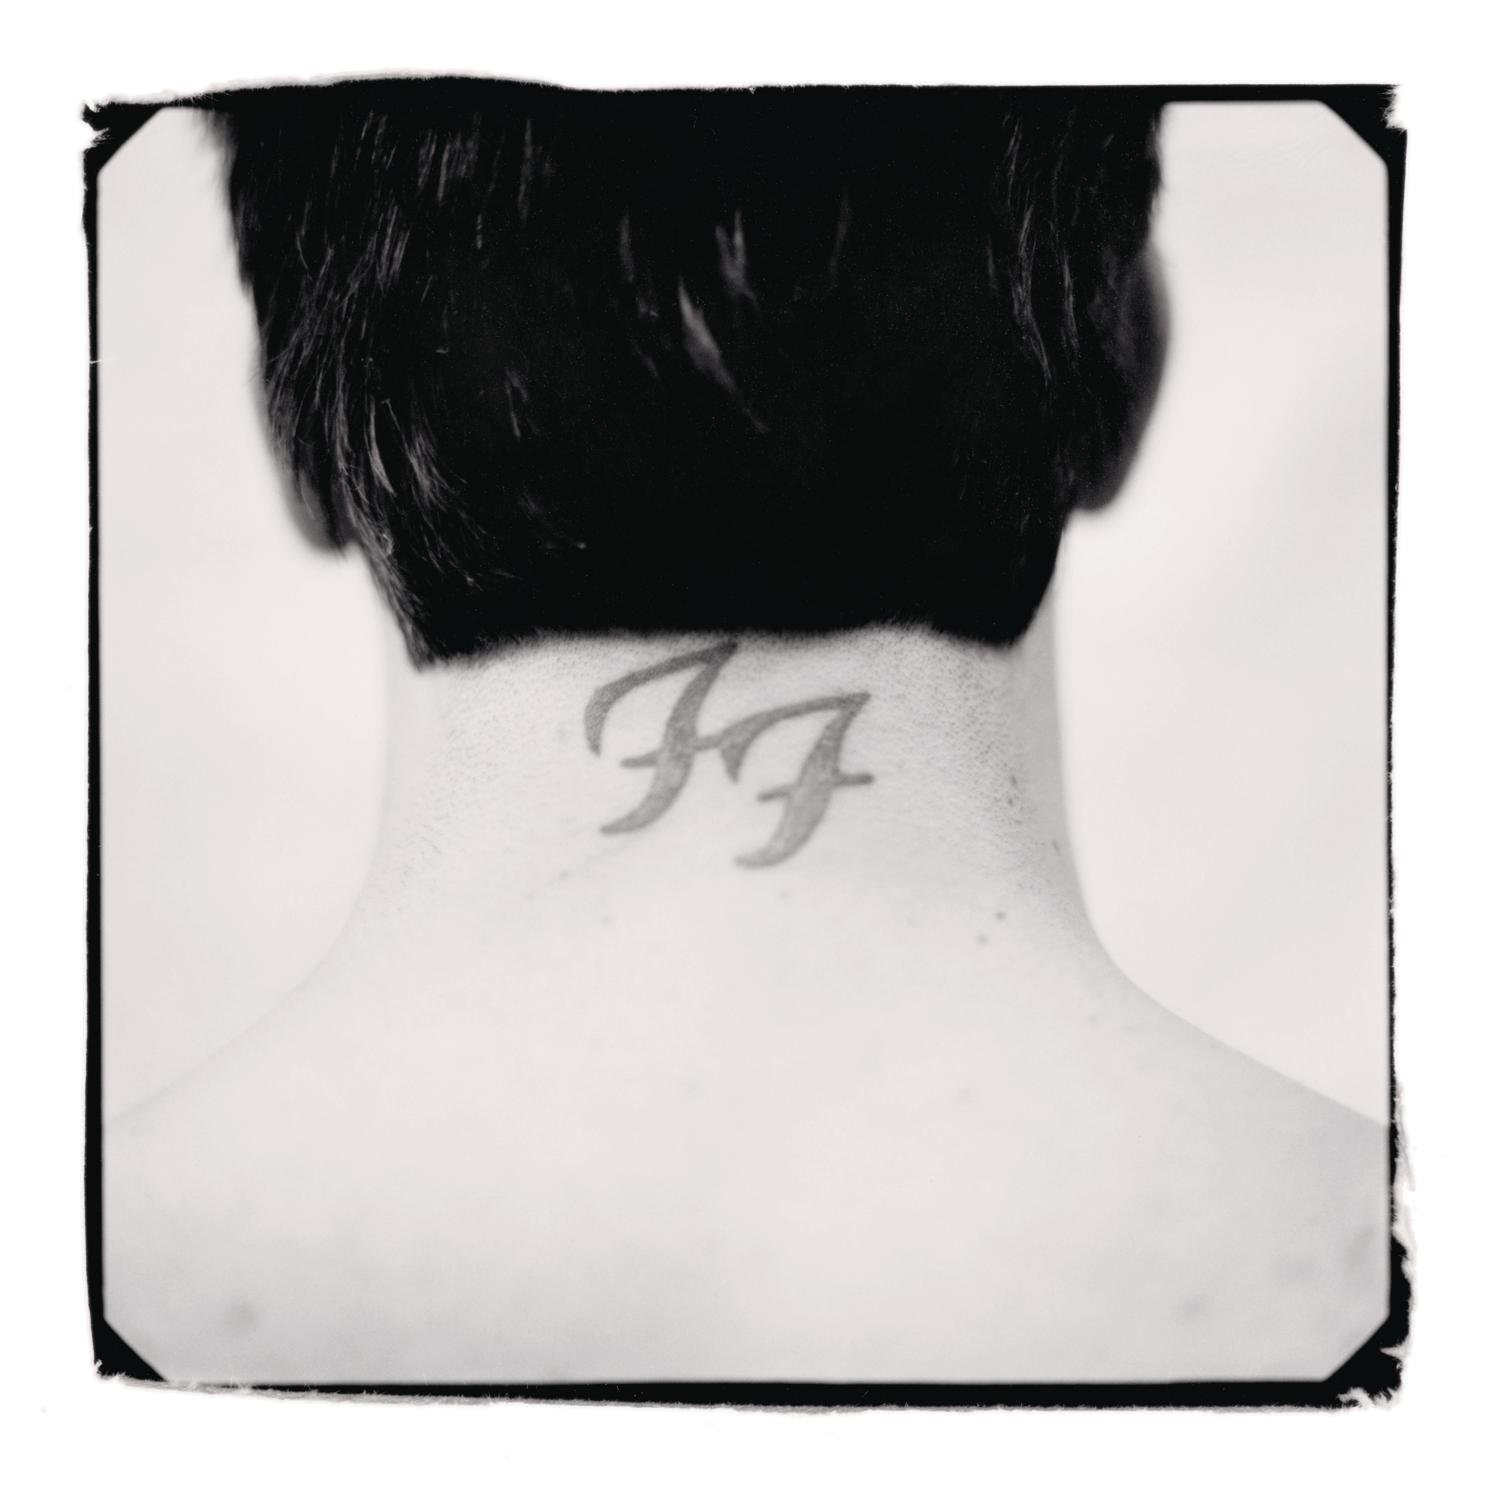 Vinylplade Foo Fighters There is Nothing Left To Lose (2 LP)